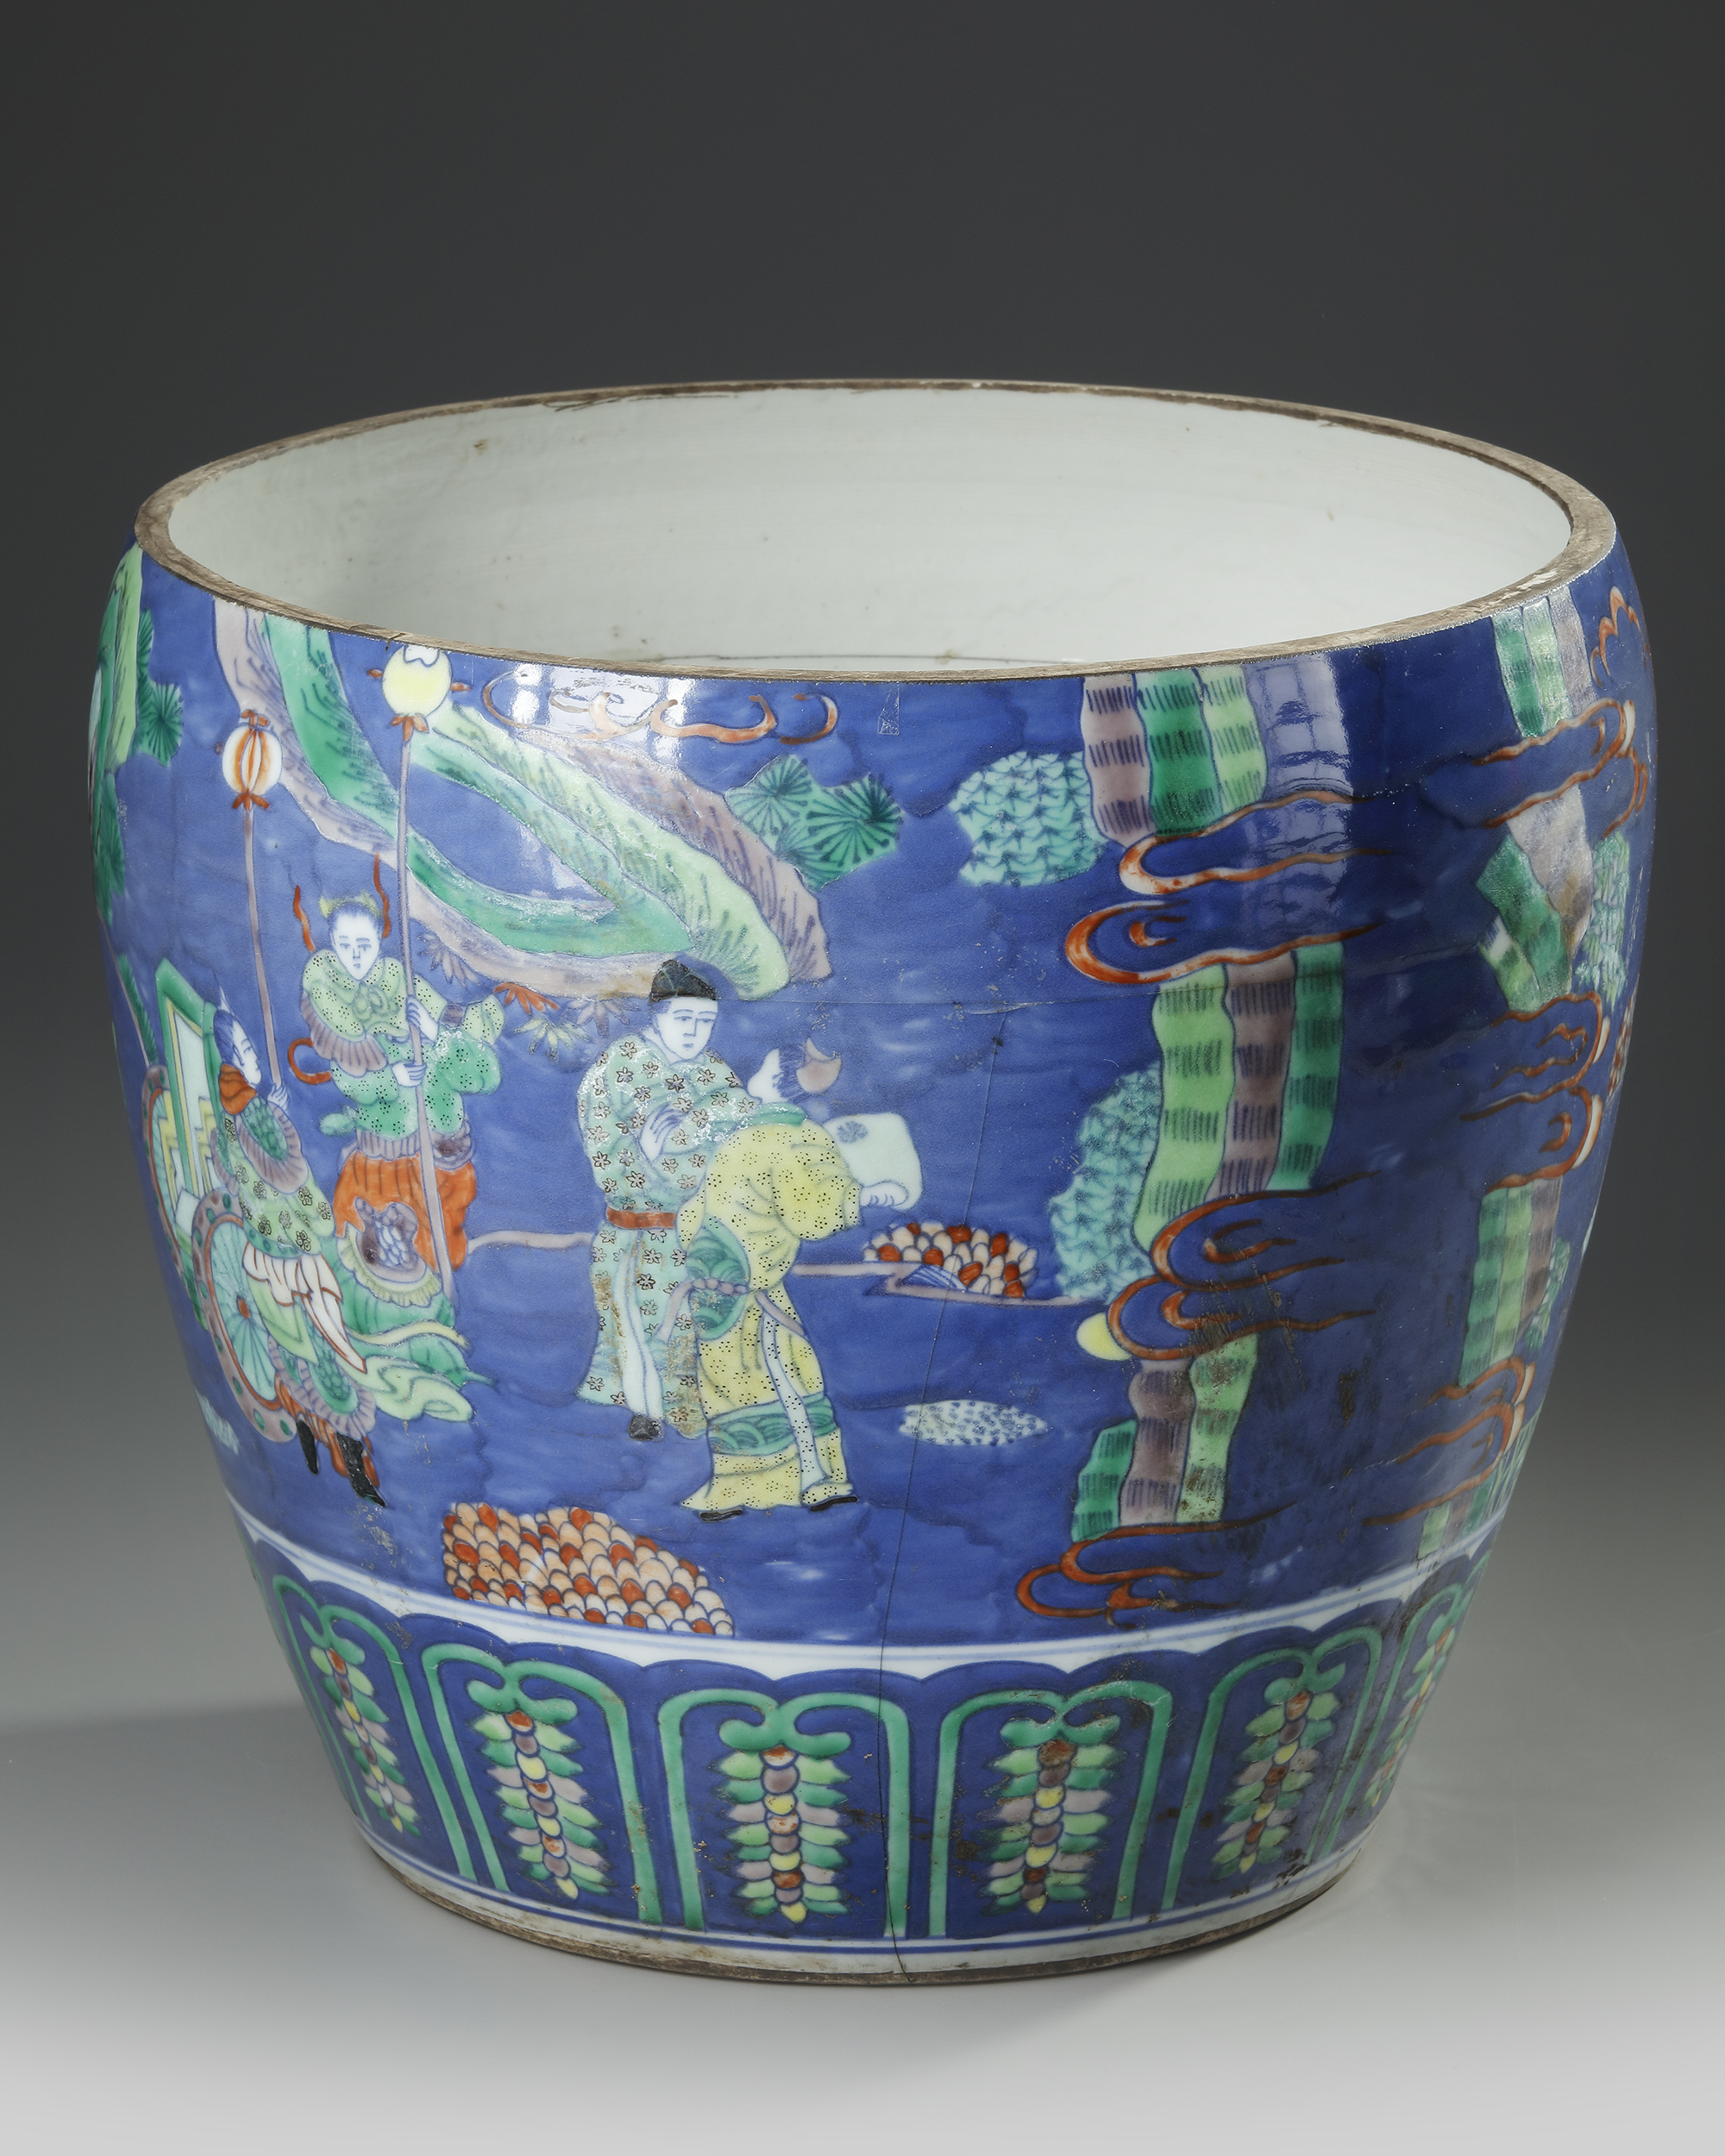 A CHINESE DOUCAI BLUE GROUND VASE, QING DYNASTY (1644-1911) - Image 2 of 4